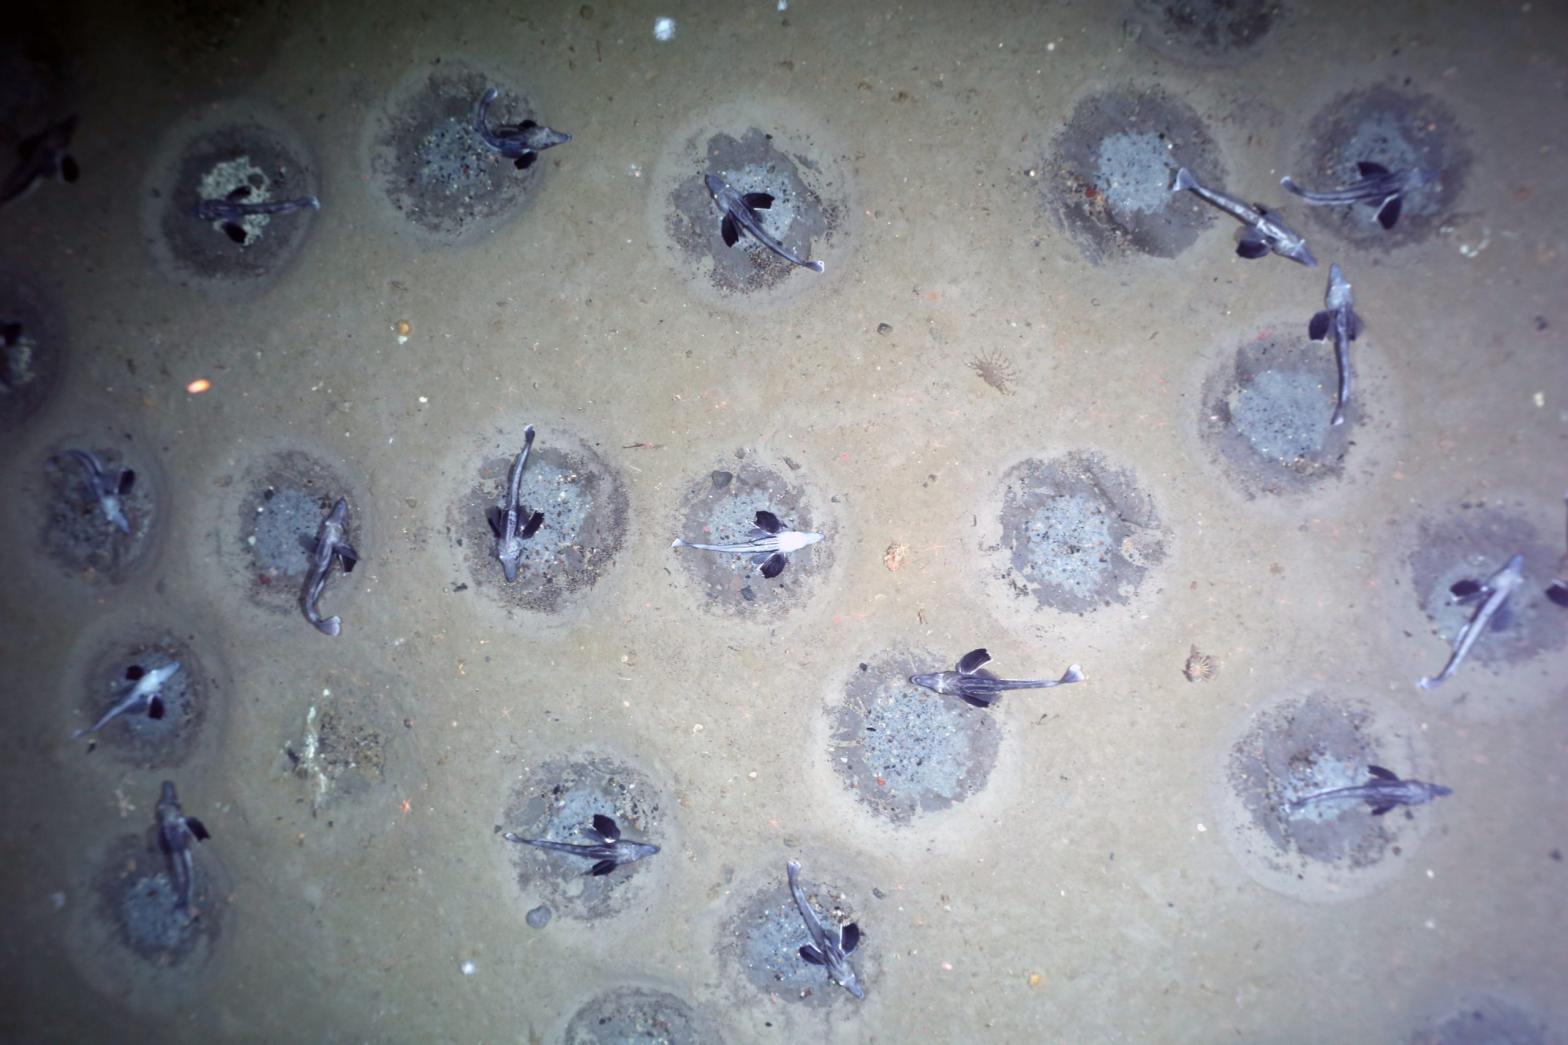 Icefish nests, some guarded, at the bottom of the Antarctic Weddell Sea in February 2021. (Photo: Alfred Wegener Institute / PS124 AWI OFOBS team)